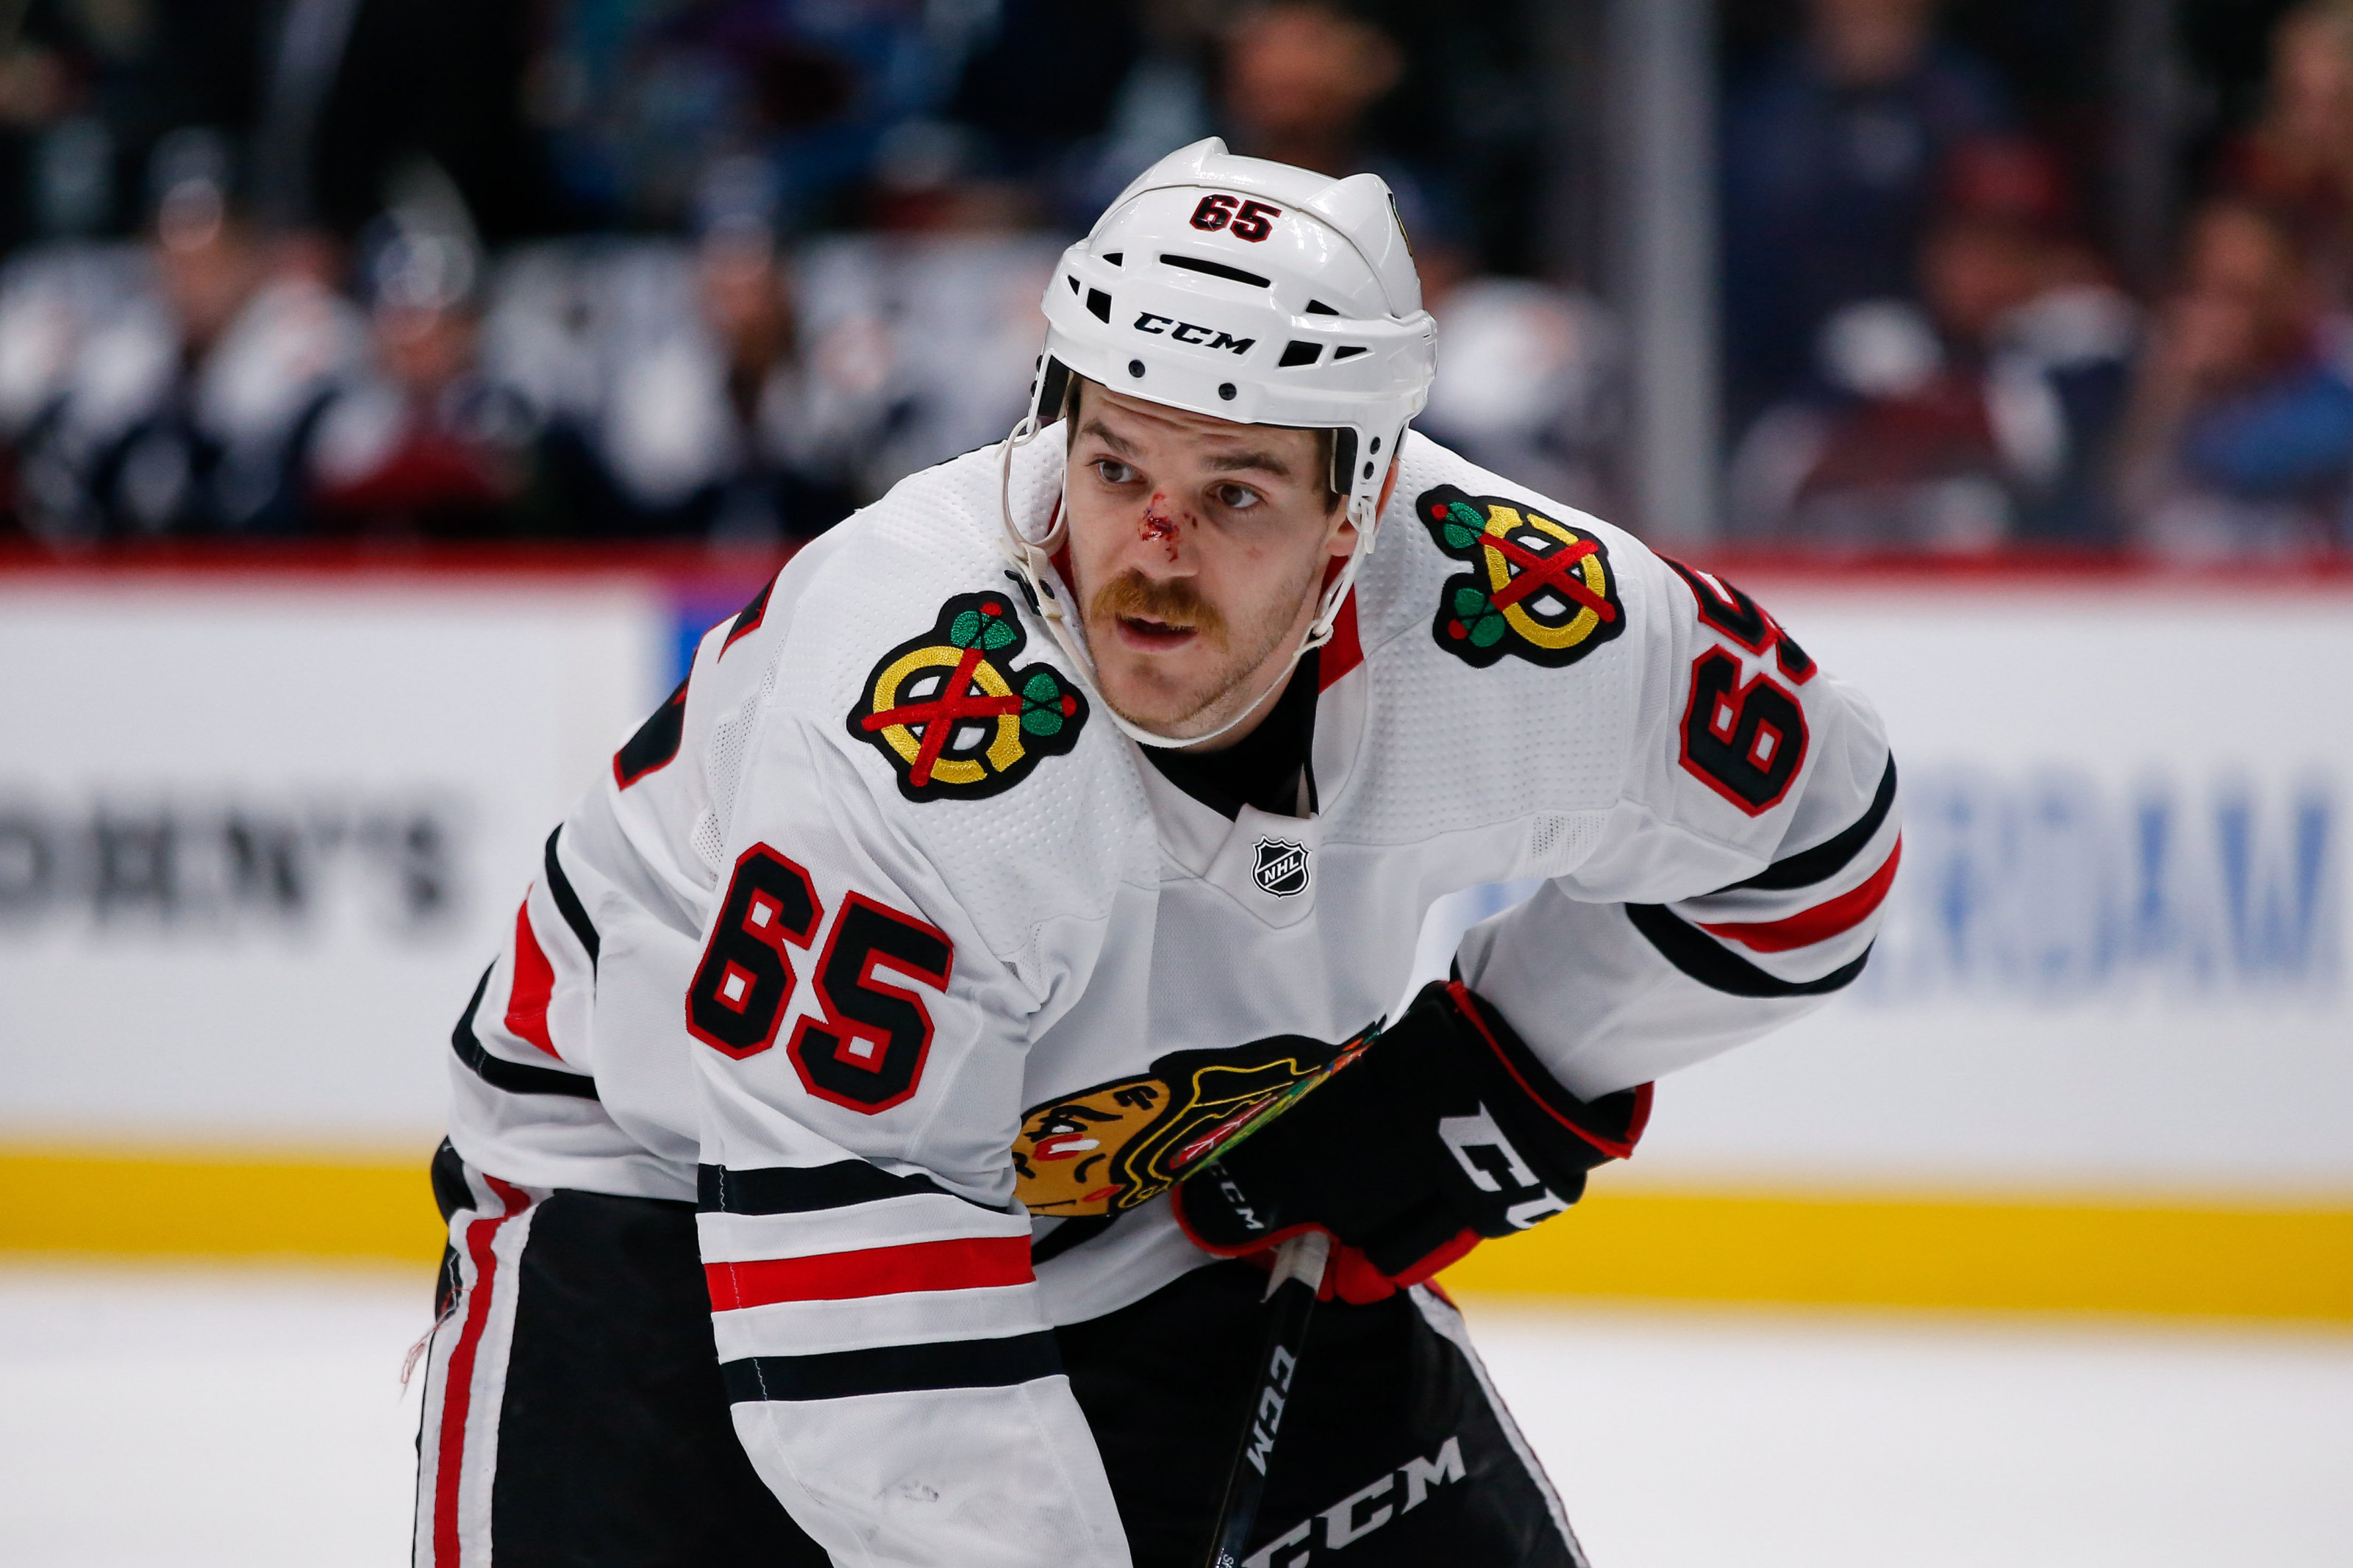 Blackhawks' Andrew Shaw retires after latest concussion